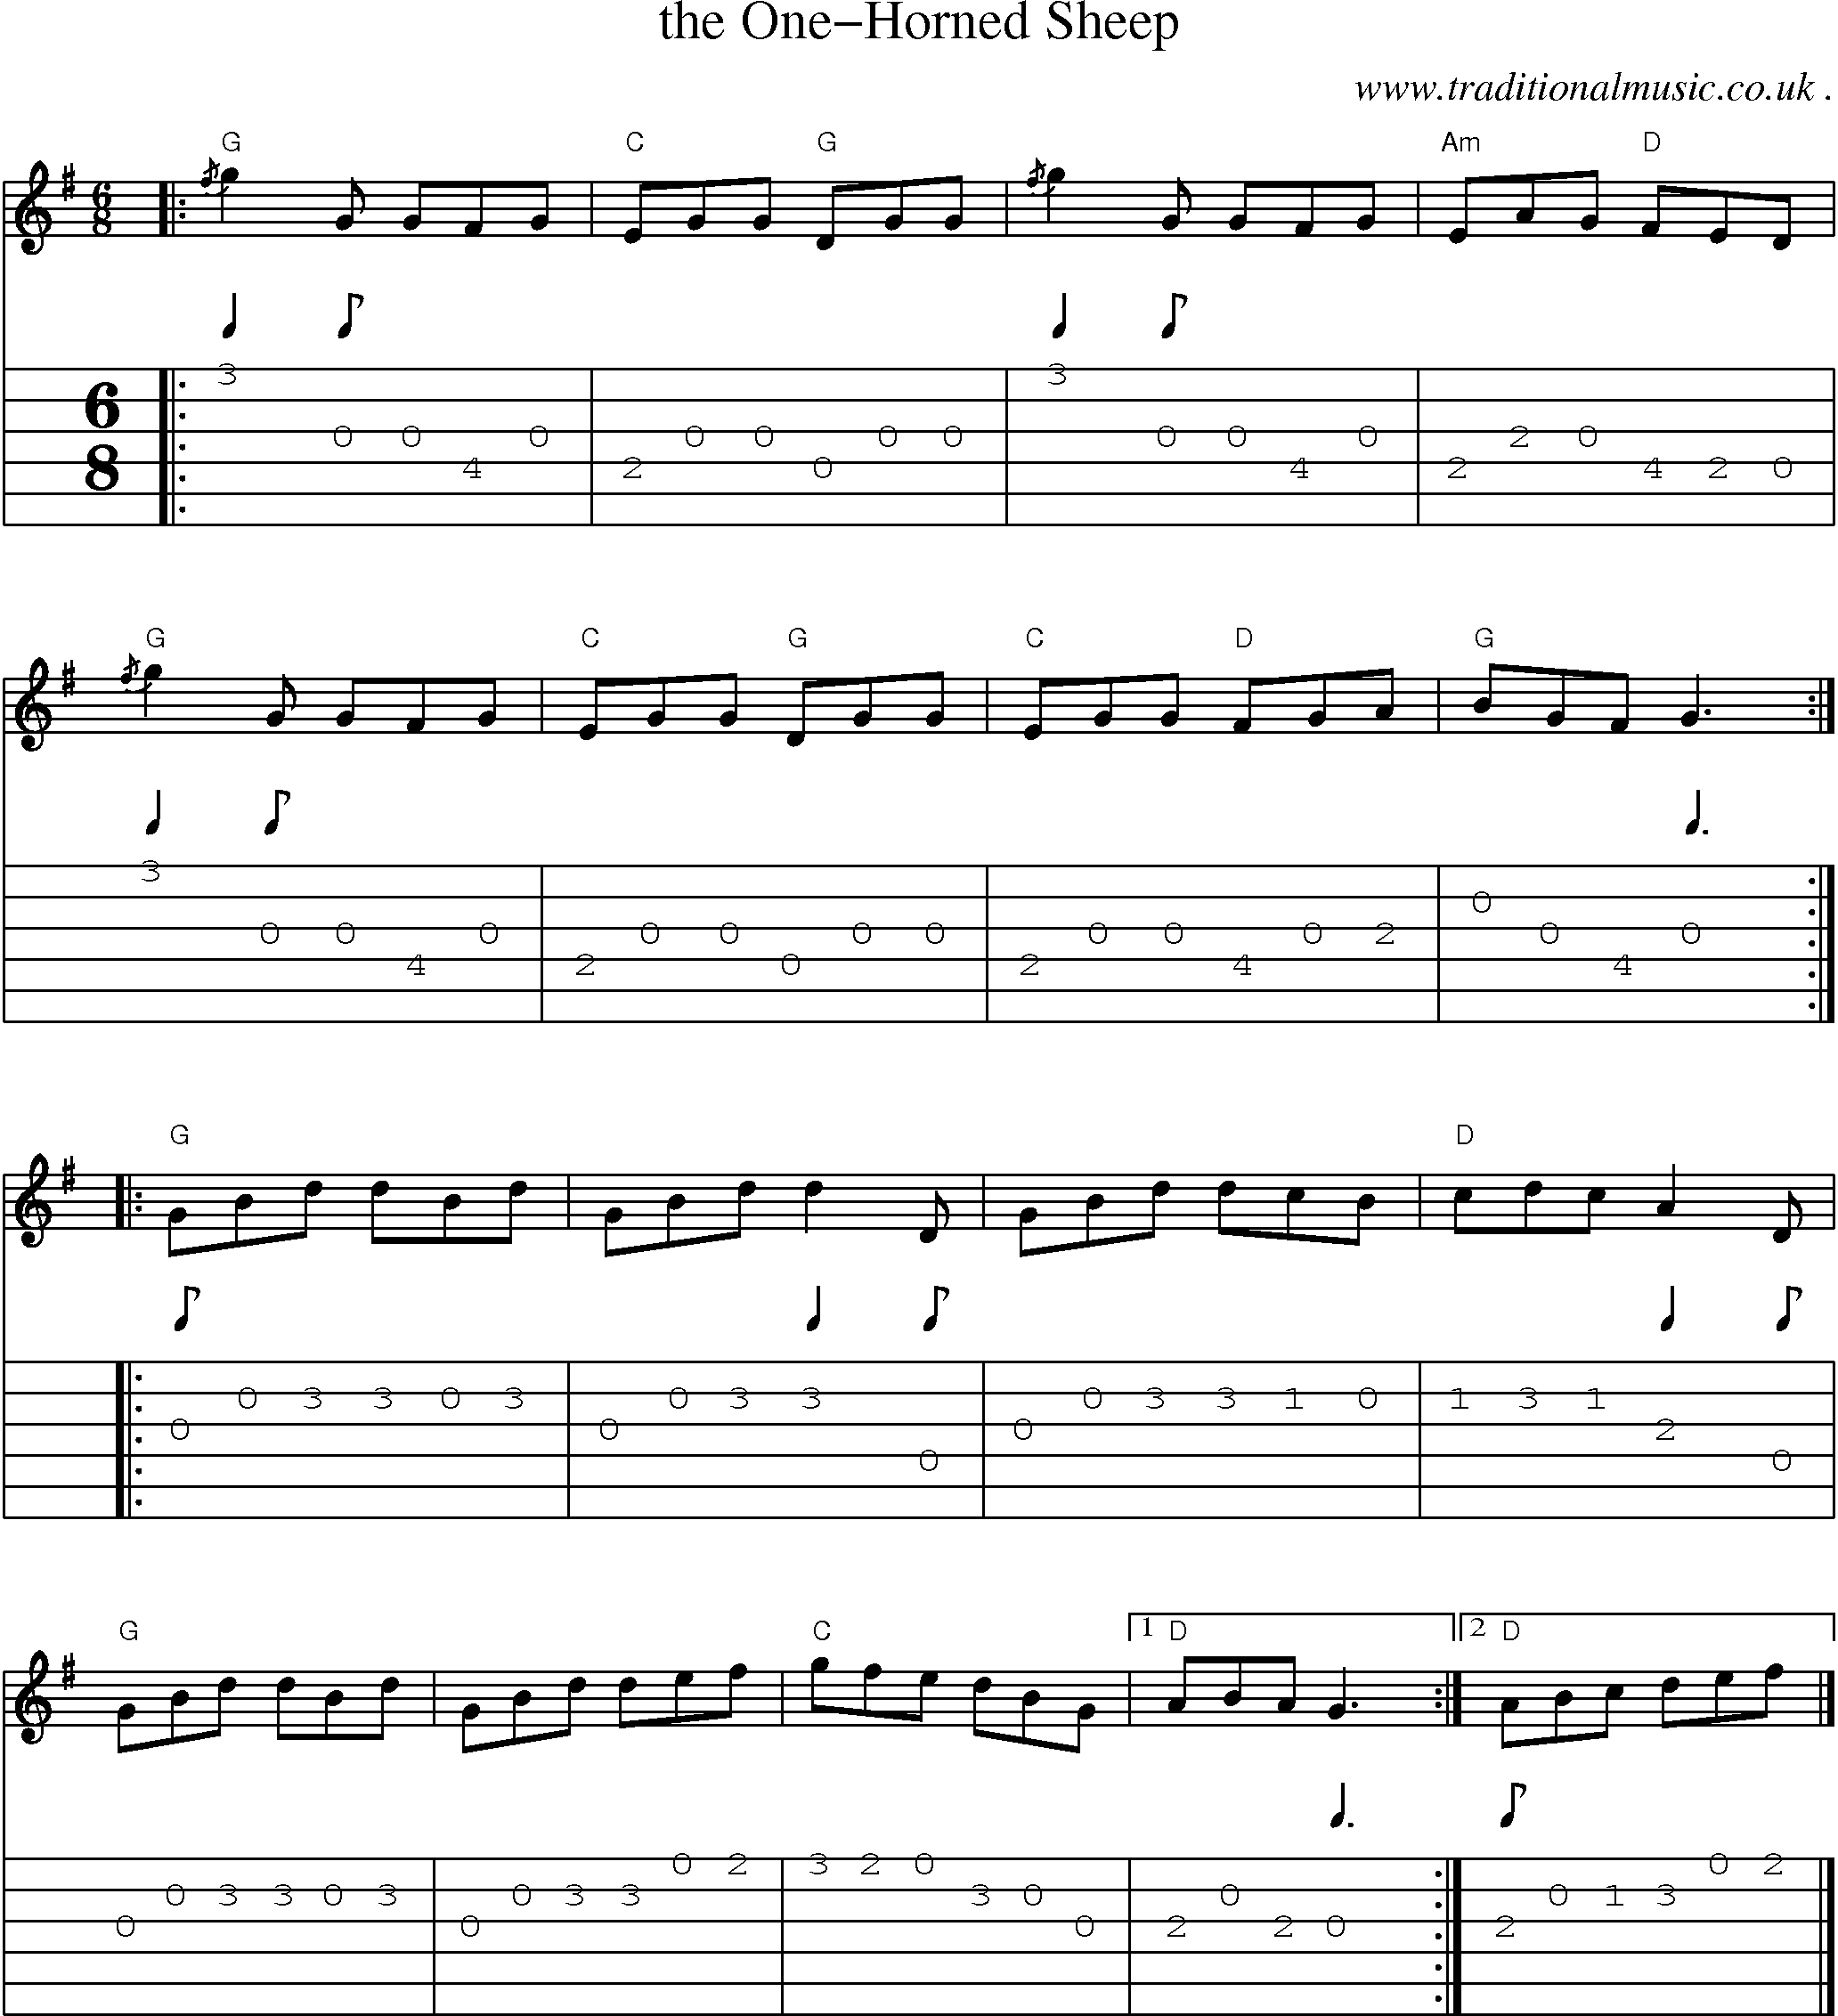 Sheet-music  score, Chords and Guitar Tabs for The One-horned Sheep